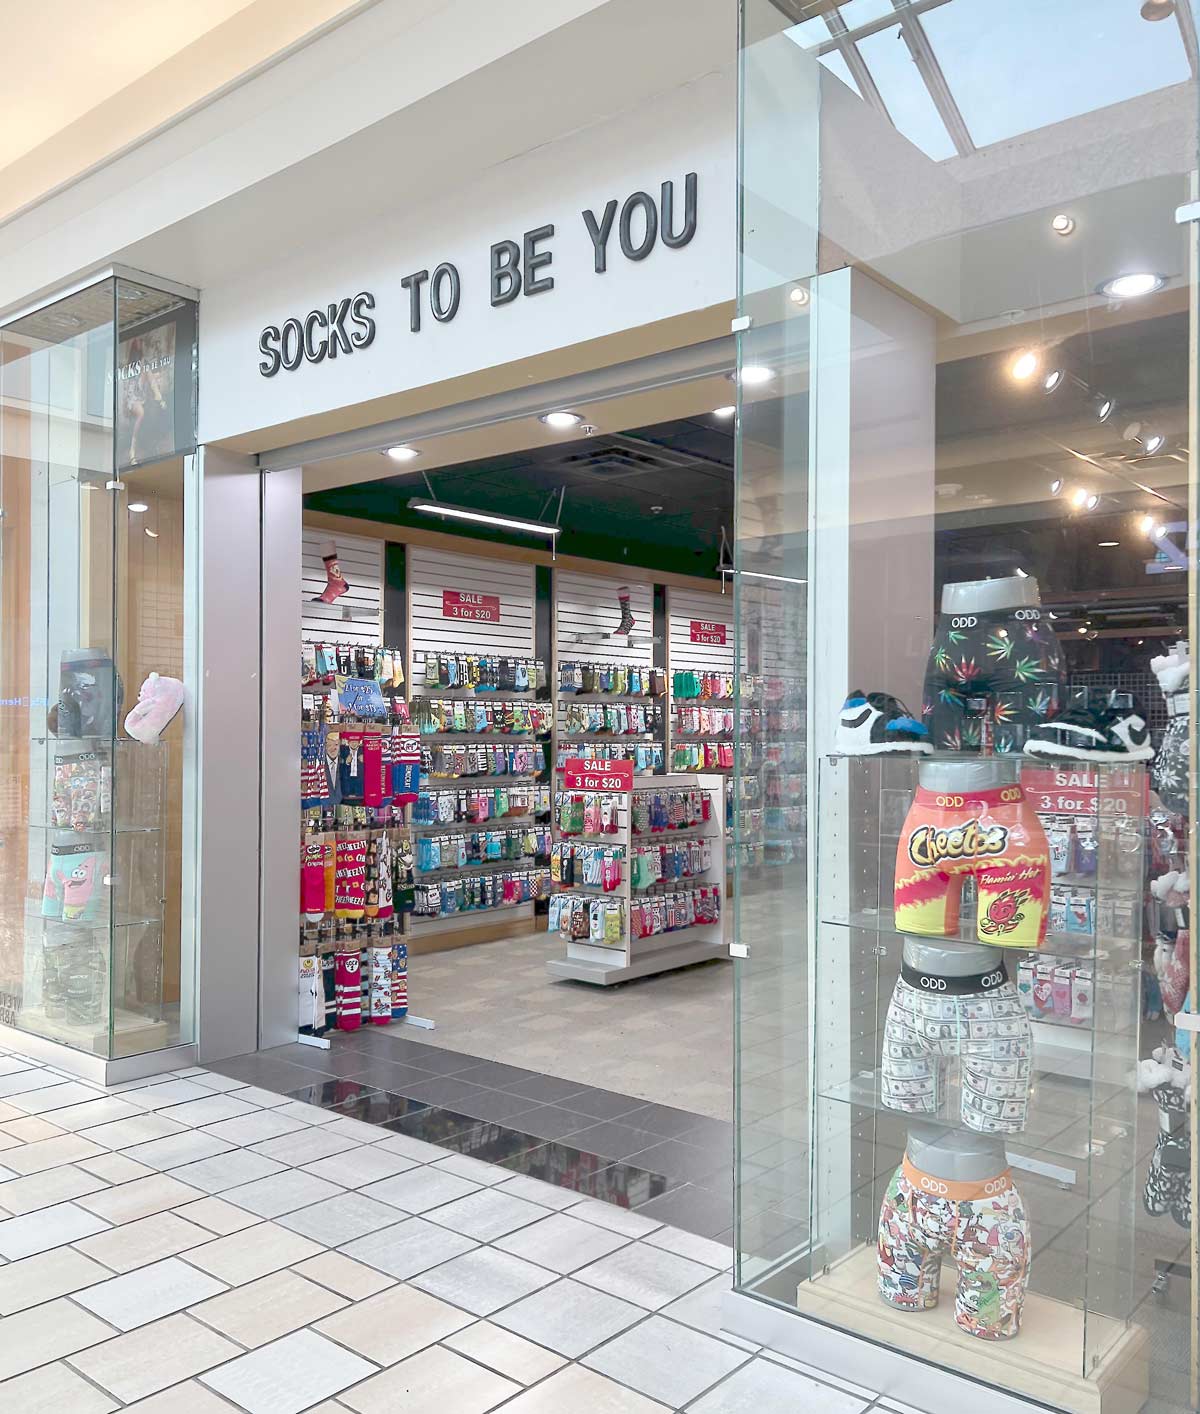 This sock store